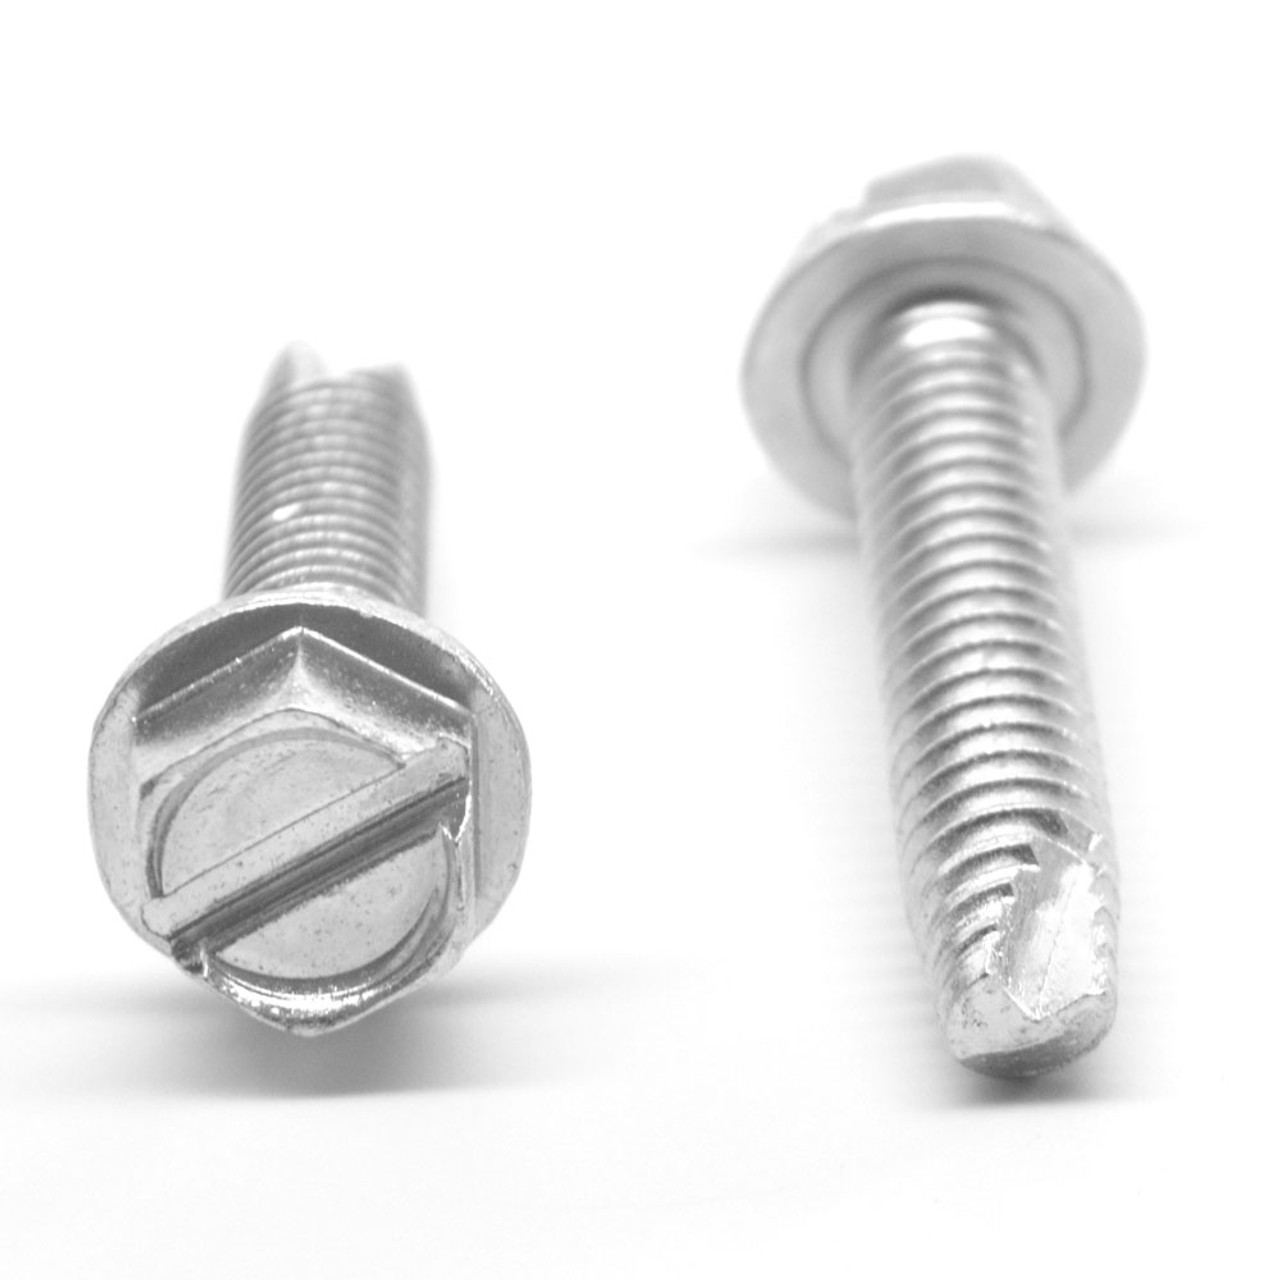 1/4-20 x 3/4 Coarse Thread Thread Cutting Screw Slotted Hex Washer Head Type 23 Stainless Steel 18-8